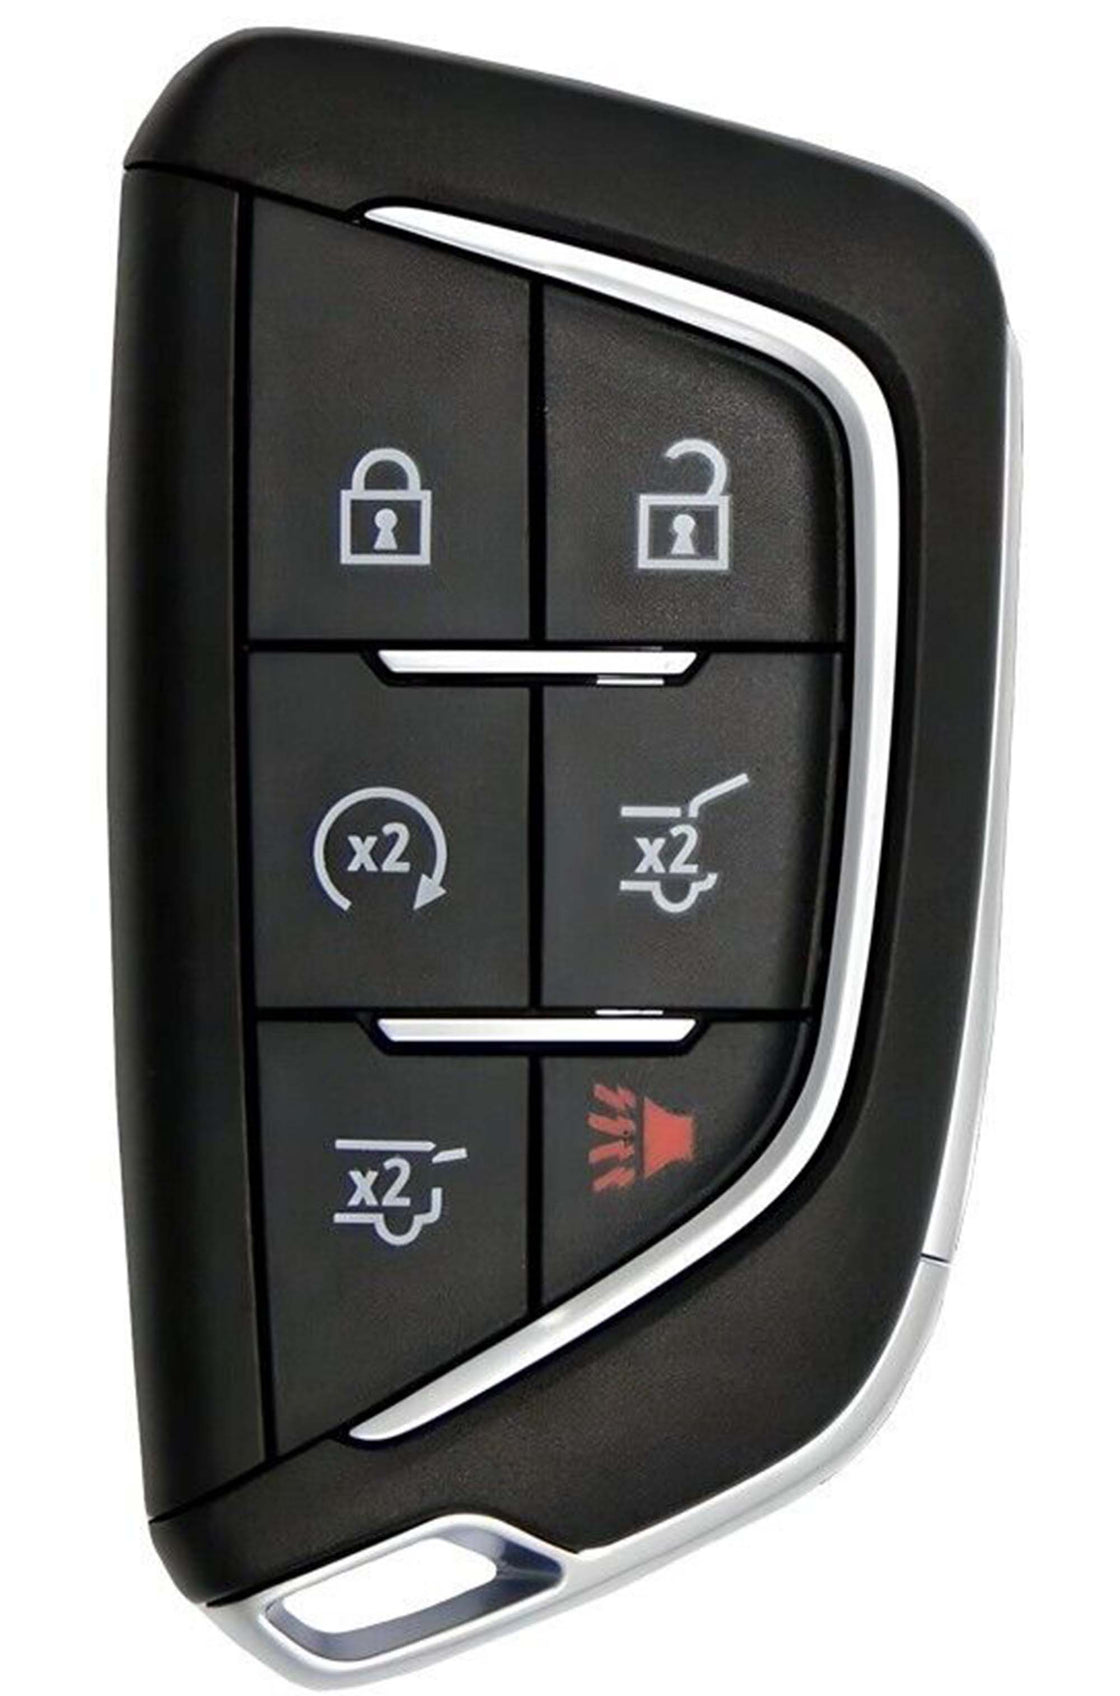 1x New Proximity Key Fob Compatible with & fit for Select Cadillac Vehicles *Read Description* 434 MHz - YG0G20TB1-02